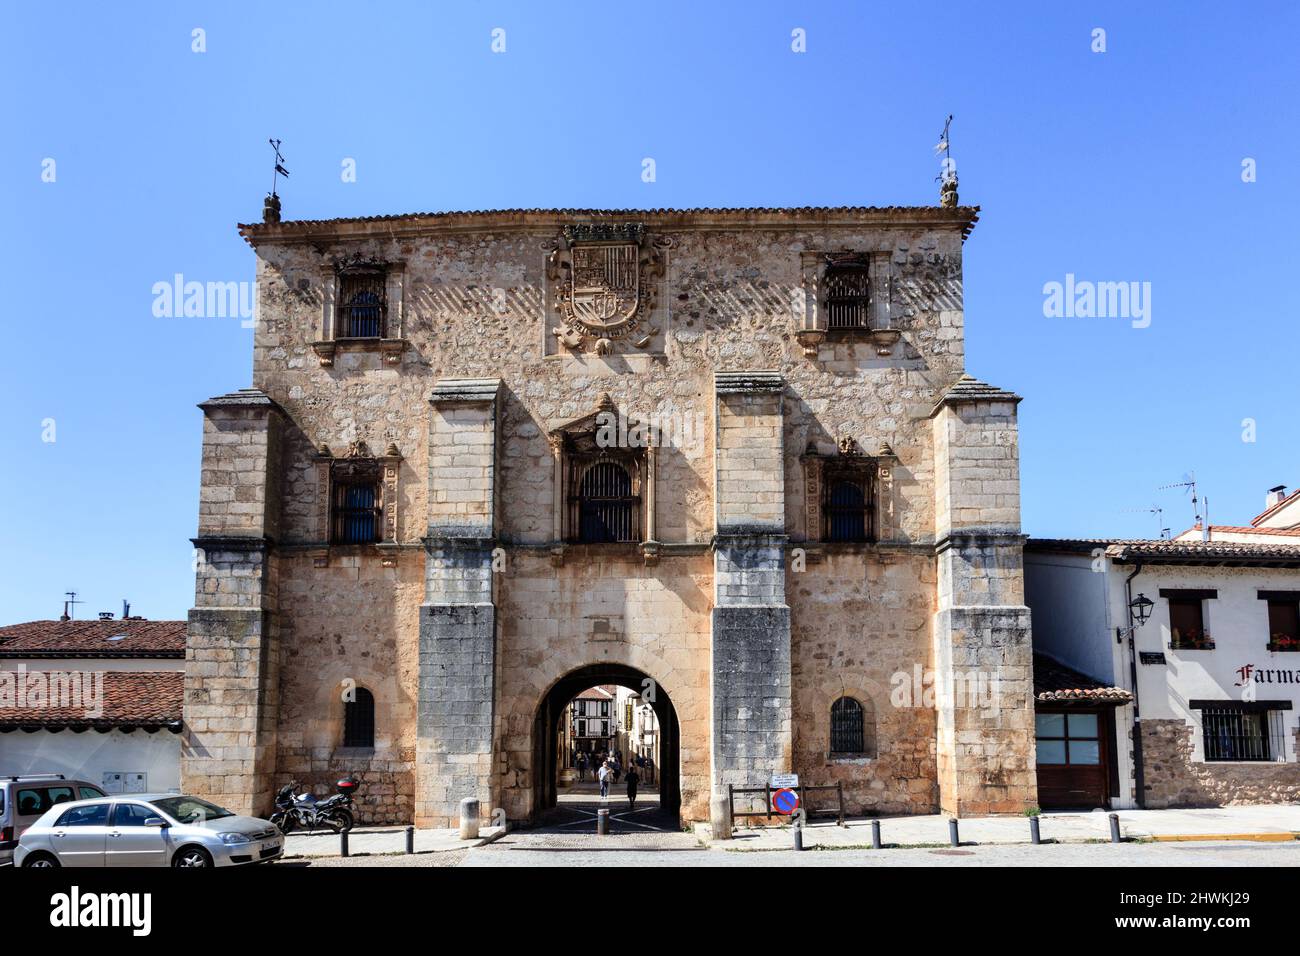 The historic archive of Covarrubias, a medieval town in the province of Burgos. It is considered one of the most beautiful village of Spain. Stock Photo